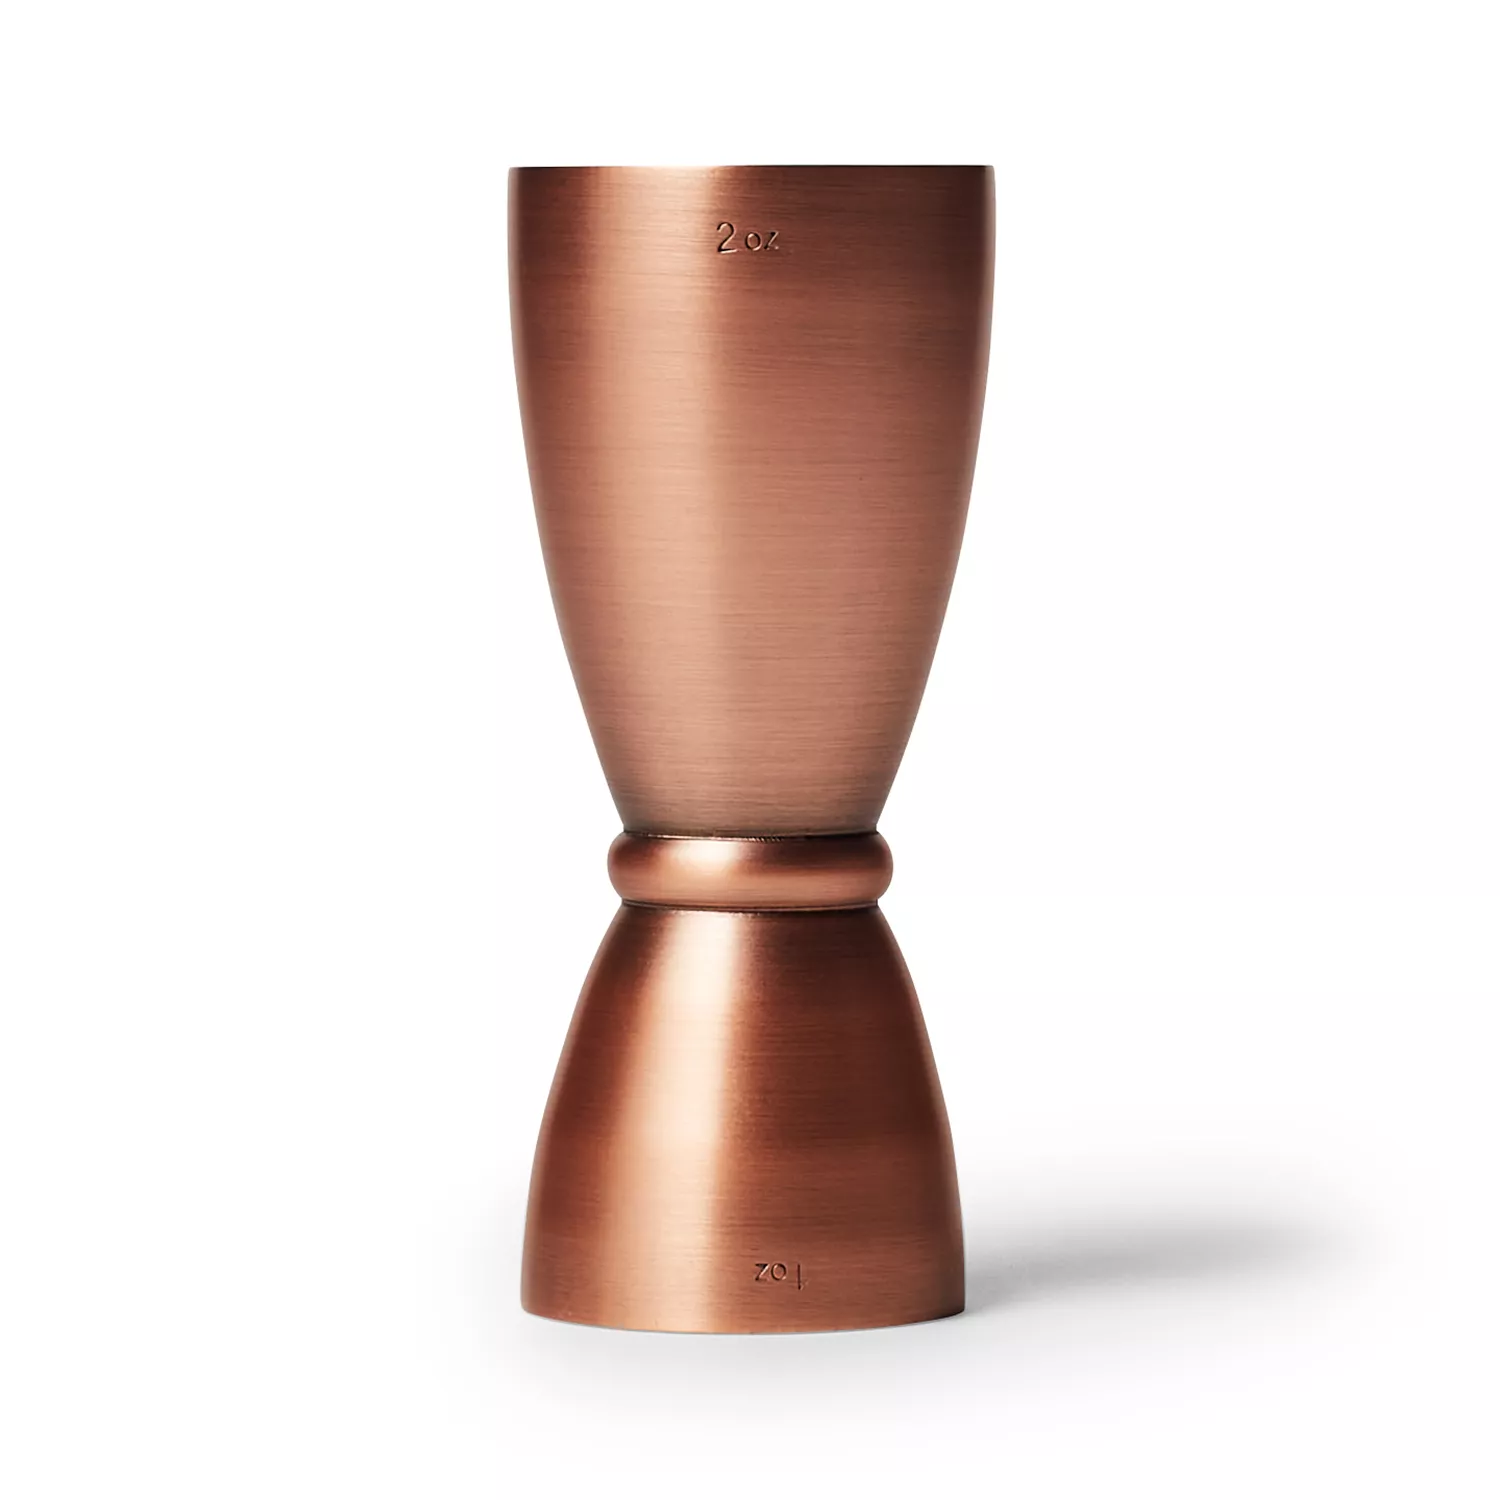 Top Shelf Cocktails Cocktail Jigger - Double Jigger with Easy to Read Measurements Inside (Copper)